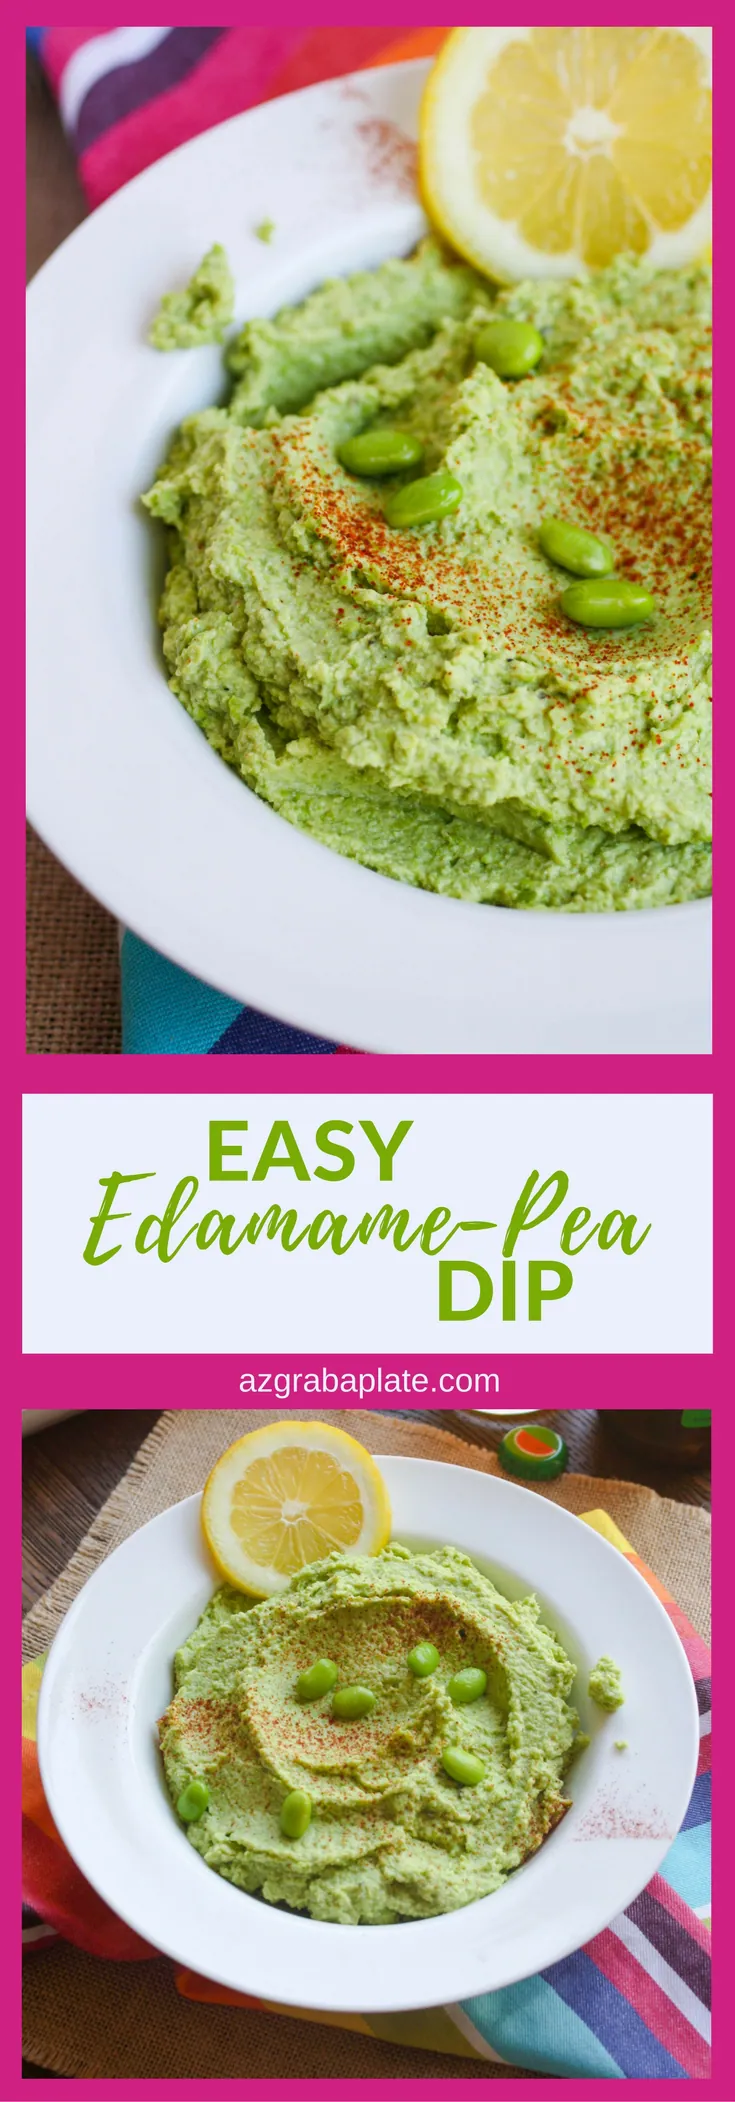 Easy Edamame-Pea Dip is fabulous for summer fun! Take it to a picnic, a party, or pack it in your lunch bag to enjoy anytime!